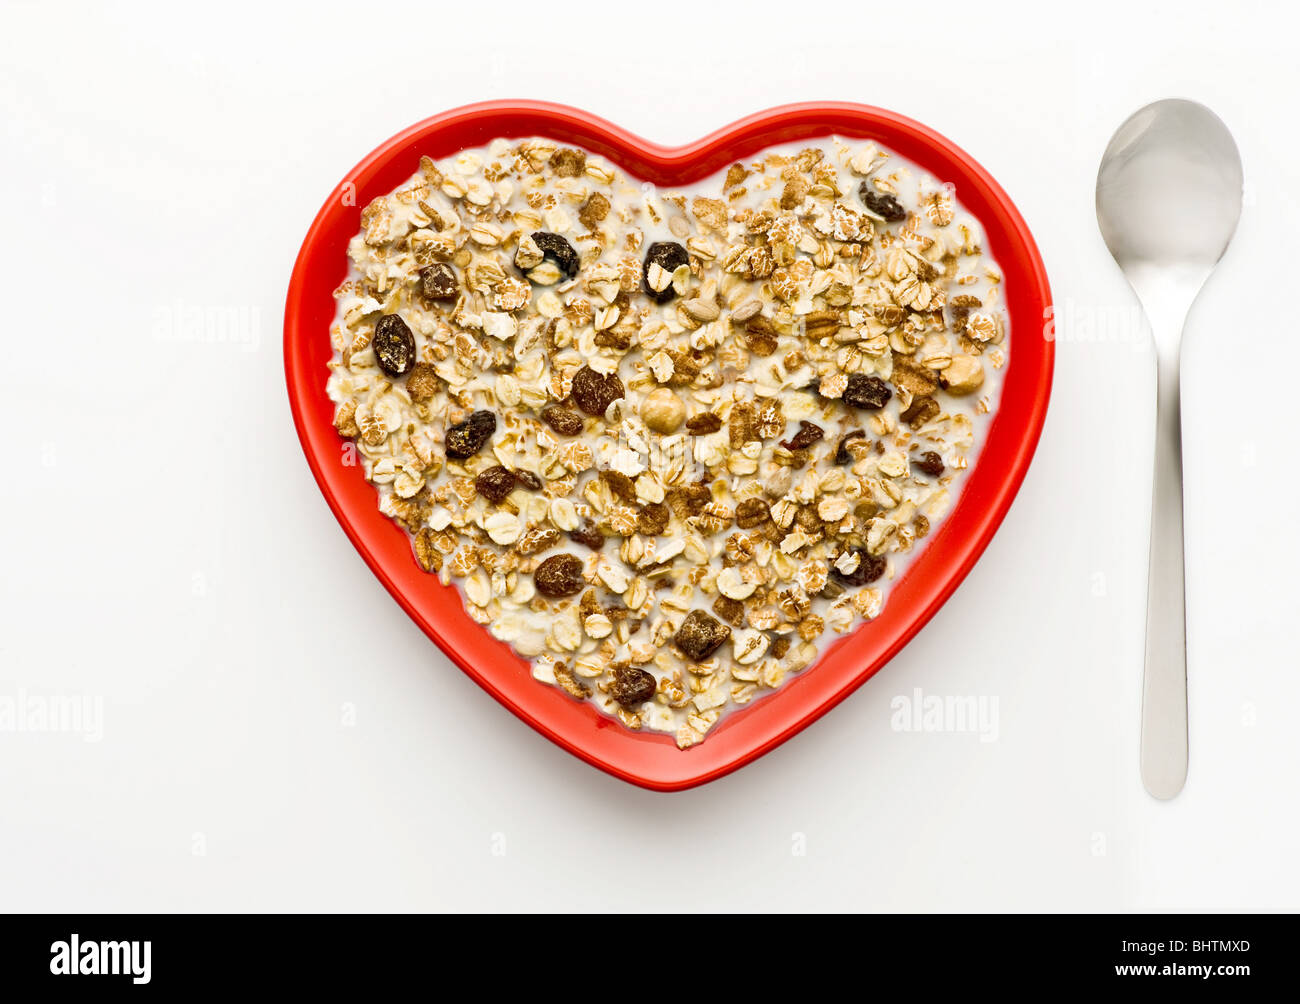 Studio shot of red heart shaped bowl of muesli and milk on a white background, shot from above. Stock Photo